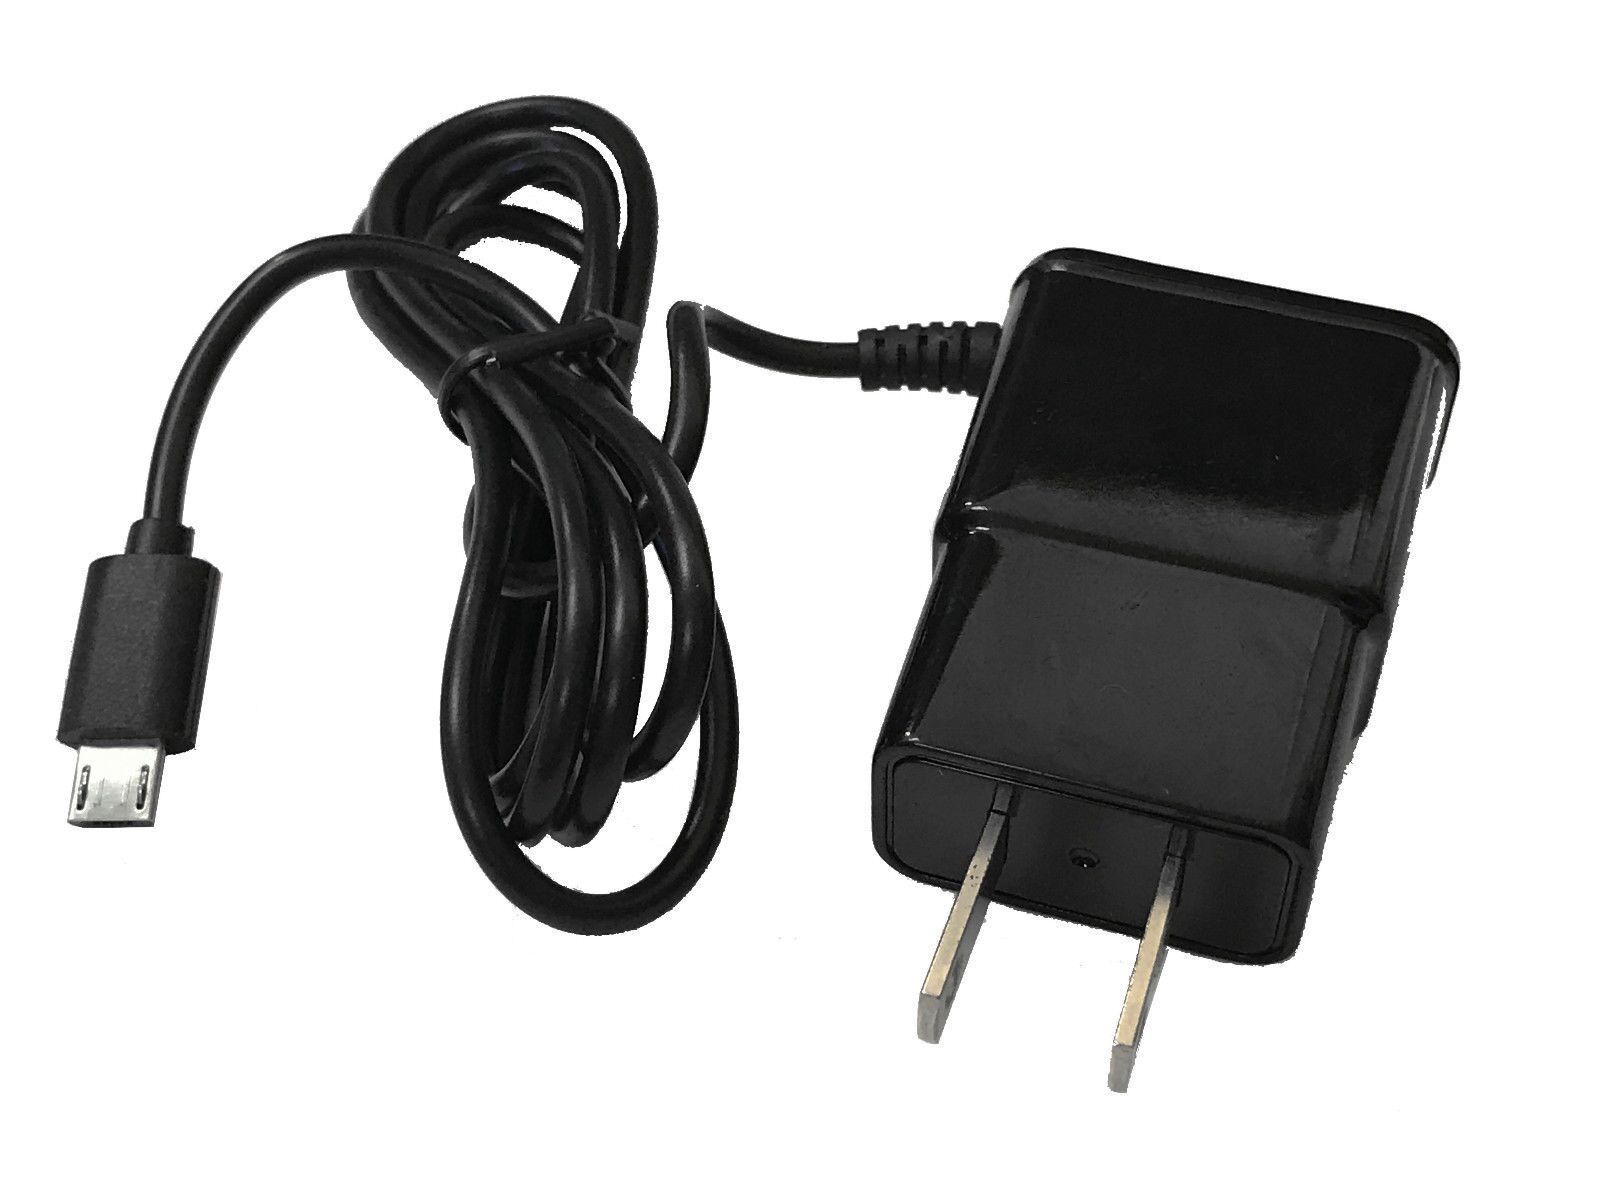 2 AMP Wall Home Travel Charger for Samsung Galaxy Sol J3 J3V SM-J3109 Amp Prime - $19.99